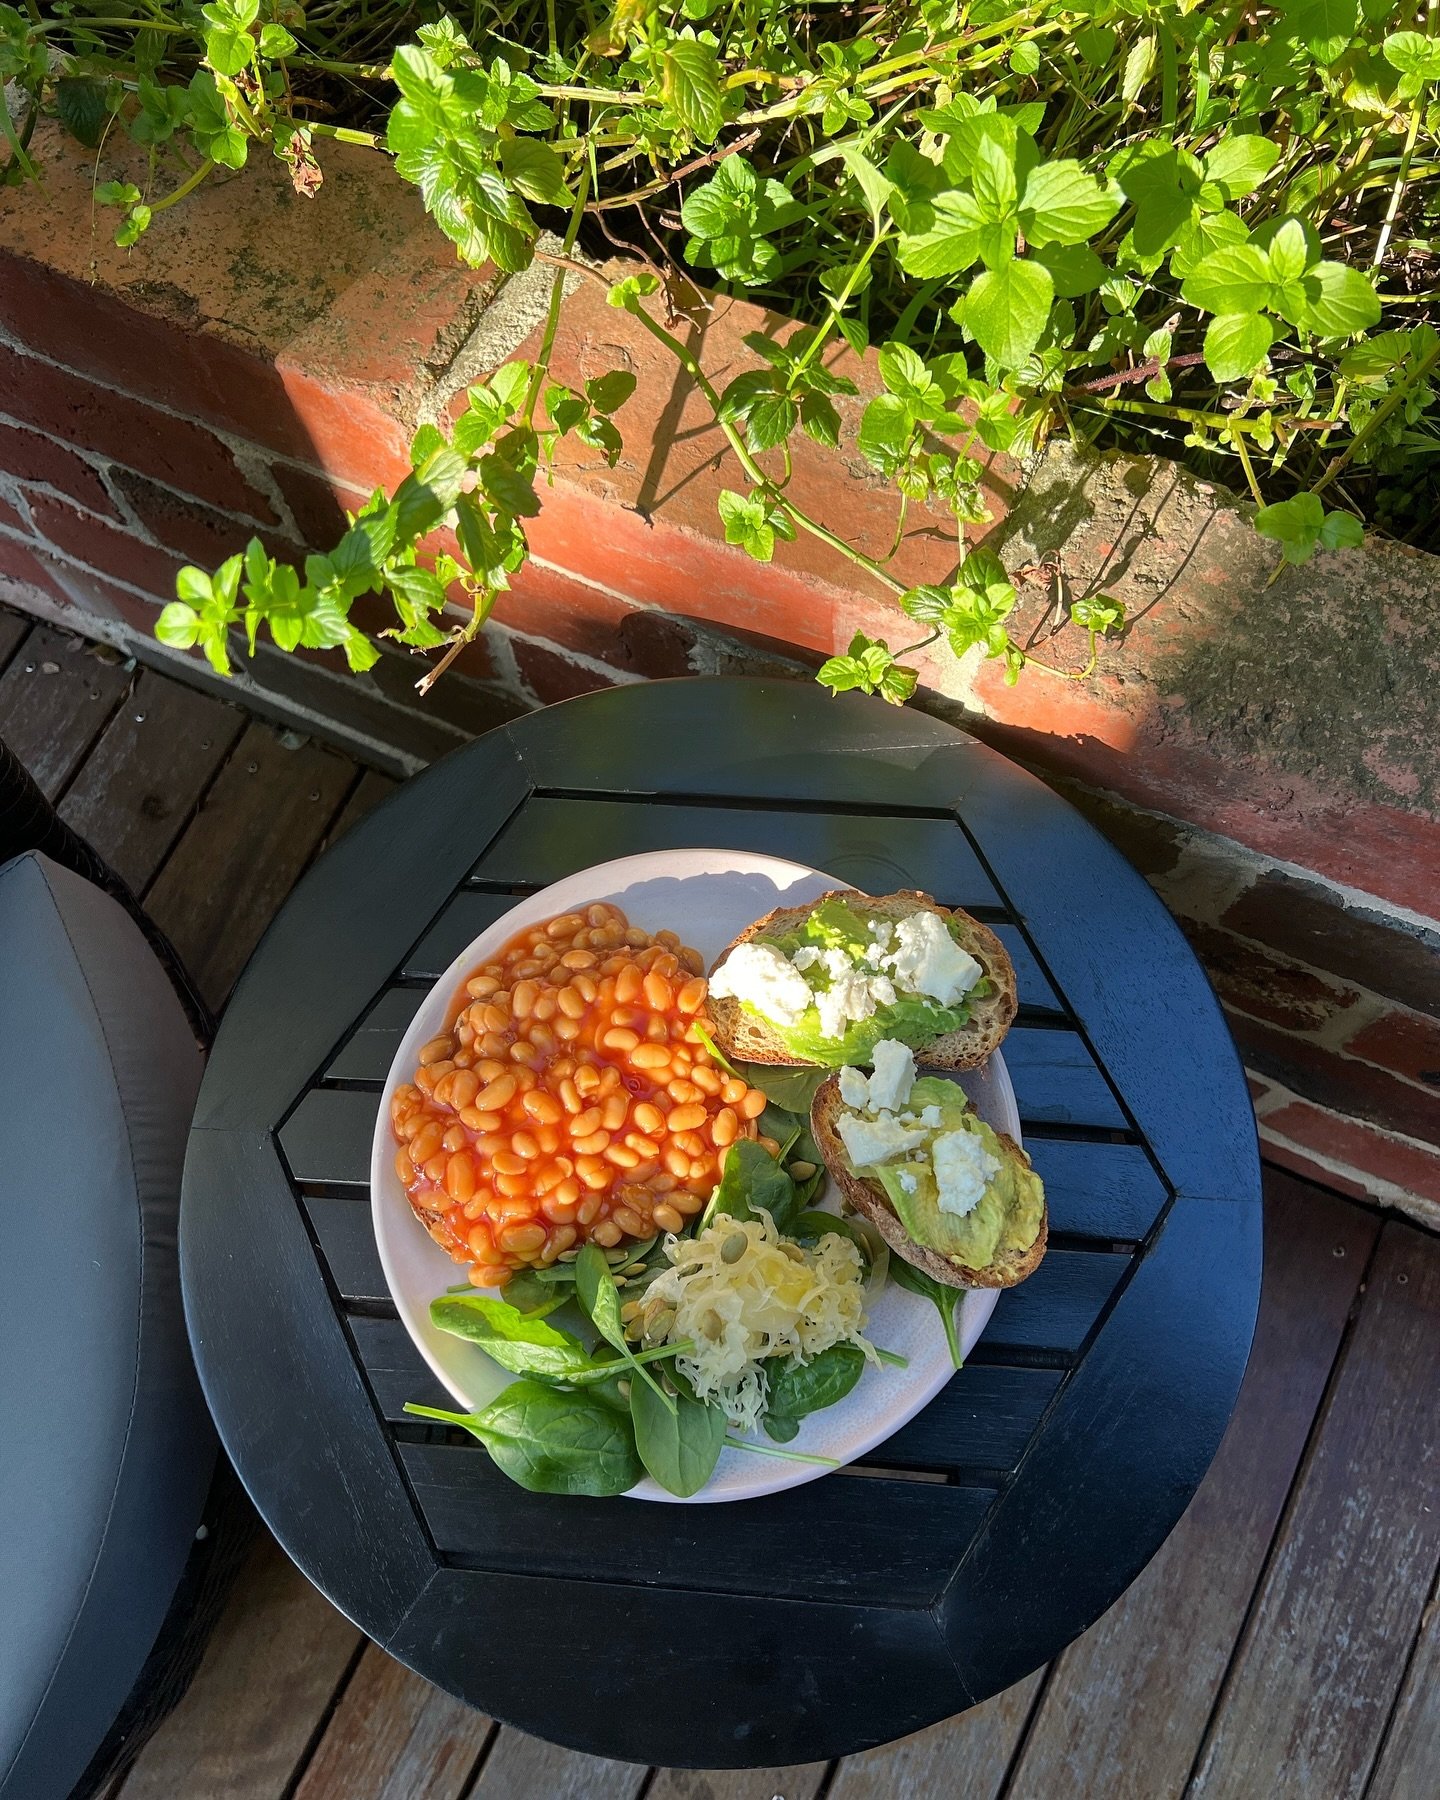 LUNCH 🥑 Can&rsquo;t beat baked beans 🫘 smashed avo &amp; feta on toast for a quick &amp; easy lunch 🌿🌞

#easylunch #smashedavo #bakedbeans #healthylunch #plantbased #eatarainbow #highfibre #dietitian #nutrition #greens #yum